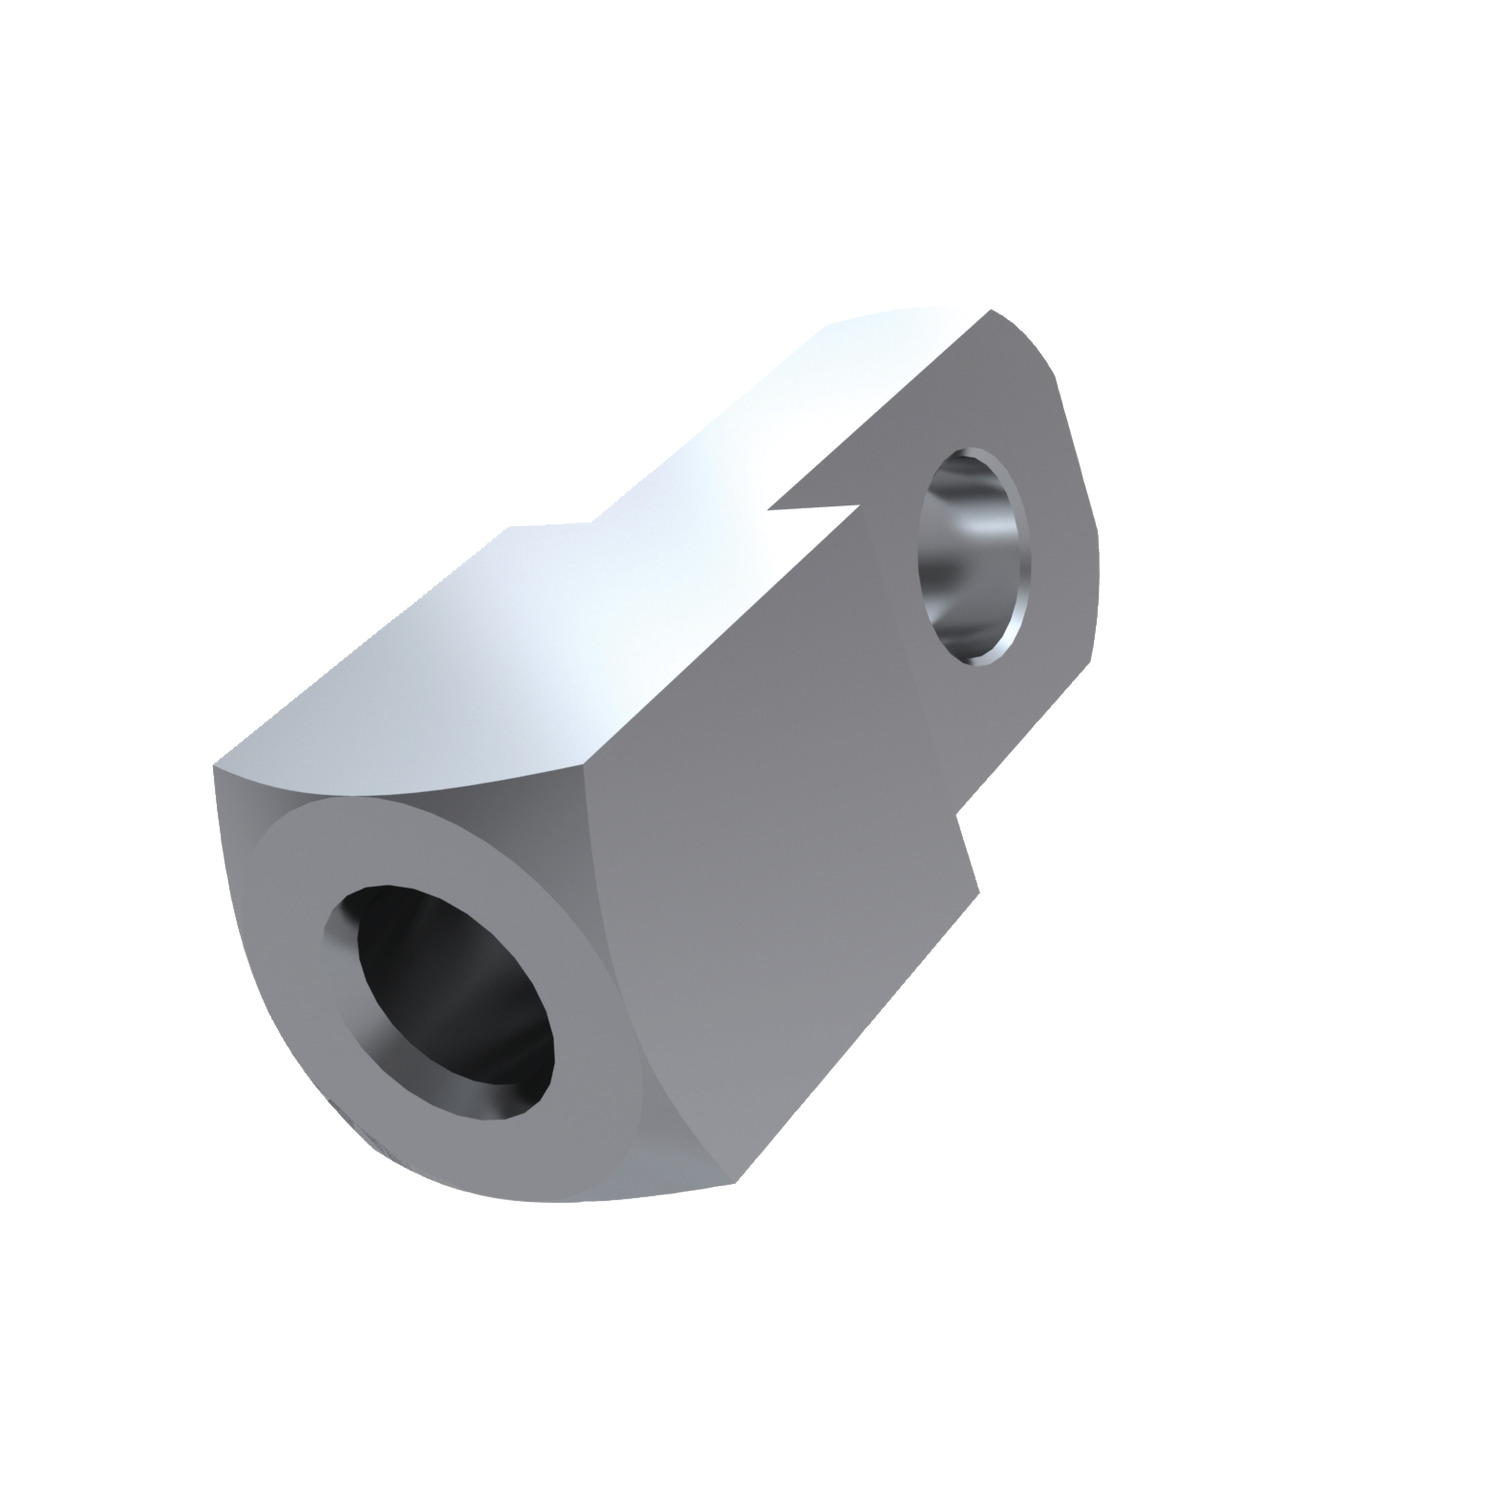 65652 - Mating Piece for Clevis Joints